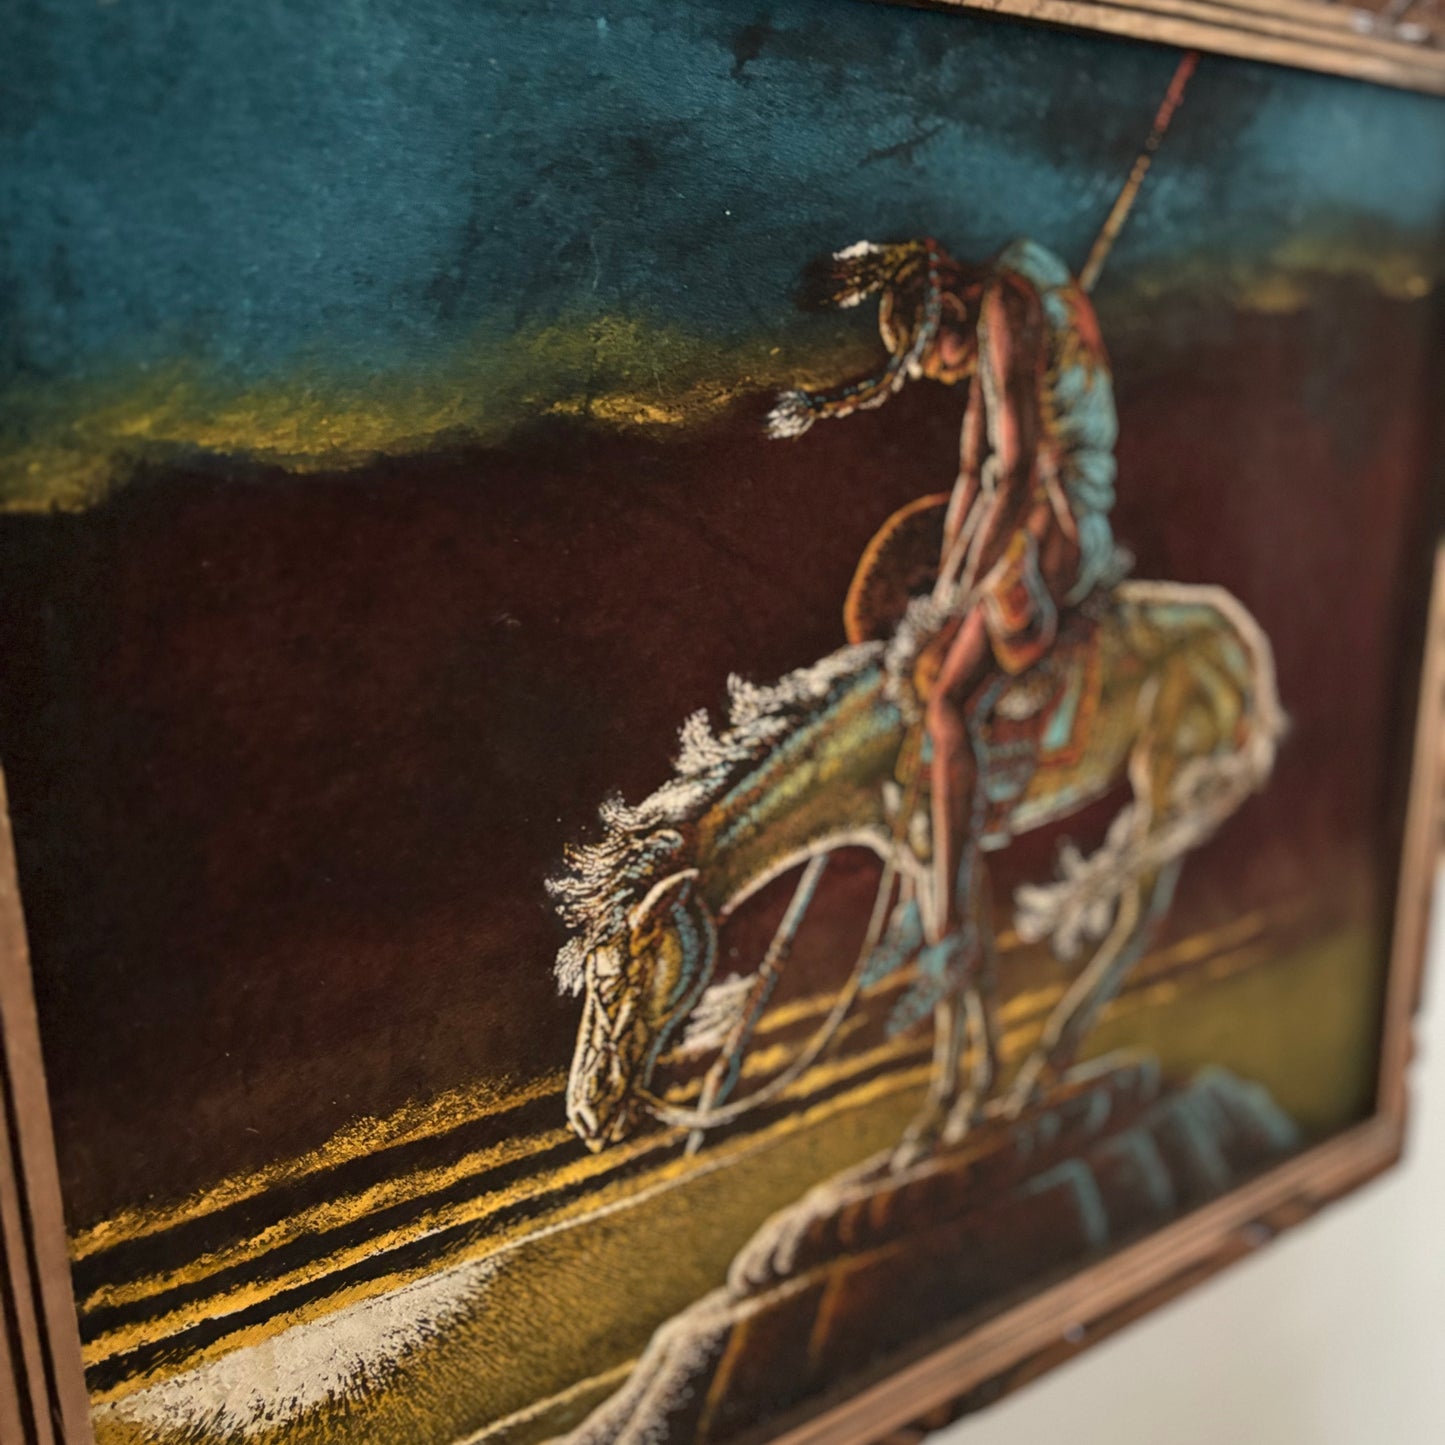 70’s Vintage Black Velvet Painting “End of Trail” with Wooded Frame | Hecho en Mexico